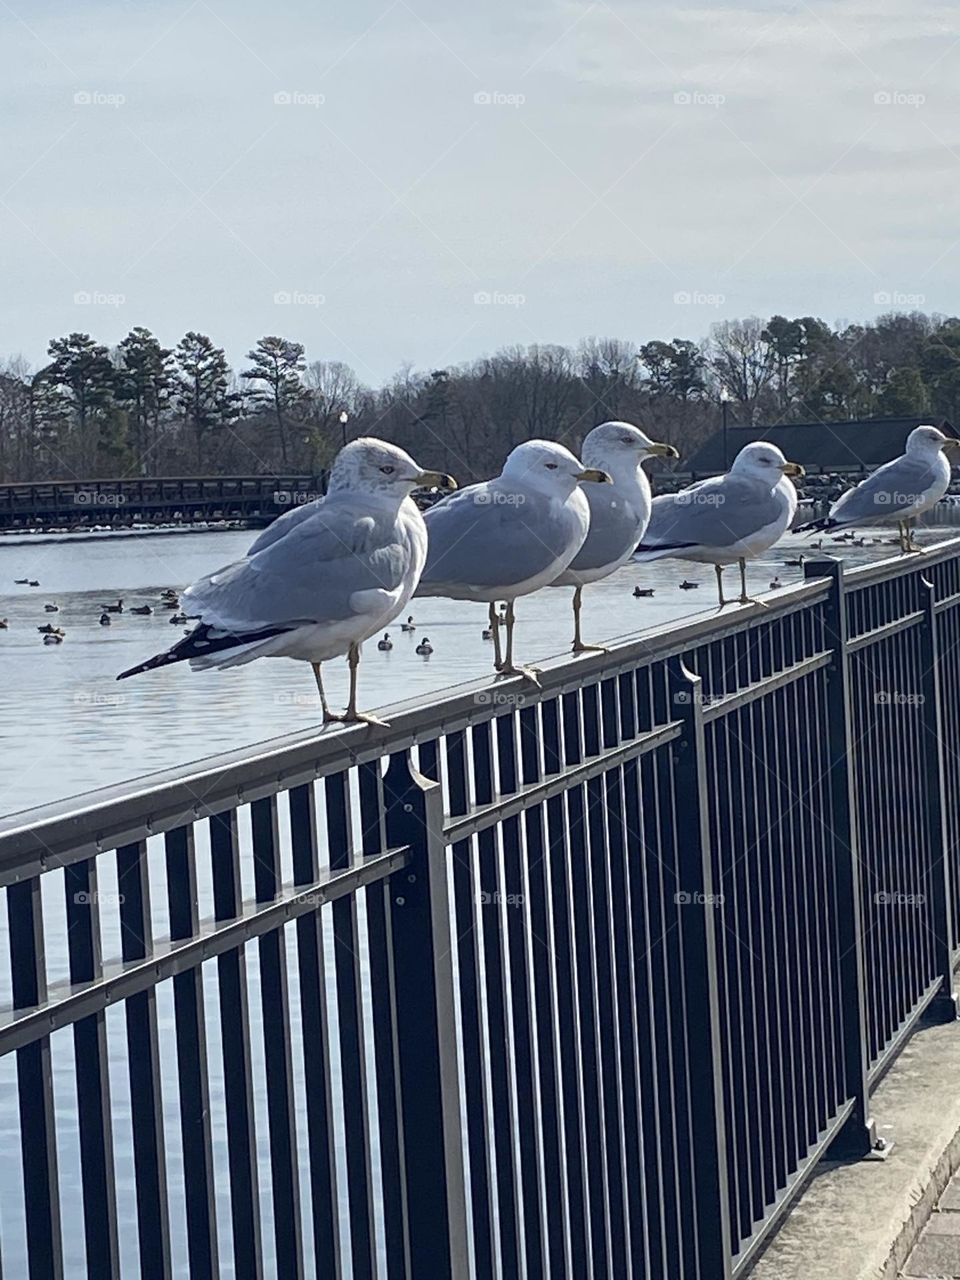 So much for ducks in a row. How about Seagulls in a row? Here are 5 lined up on a fence at a local reservoir and walking path. I guess they needed a break from all the flying and swimming. 